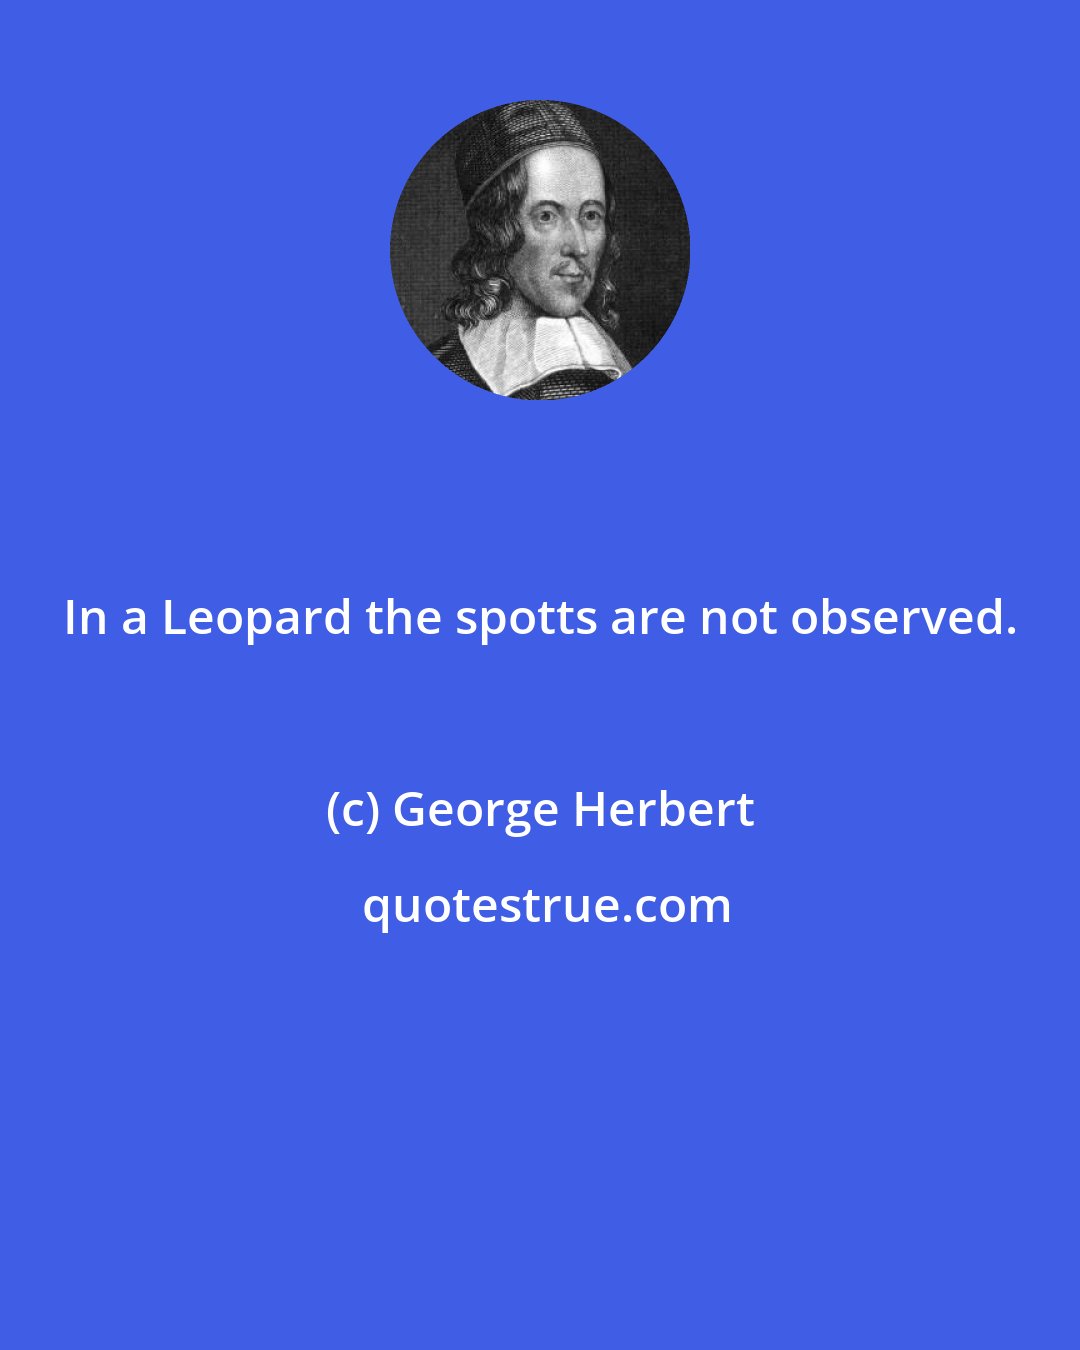 George Herbert: In a Leopard the spotts are not observed.